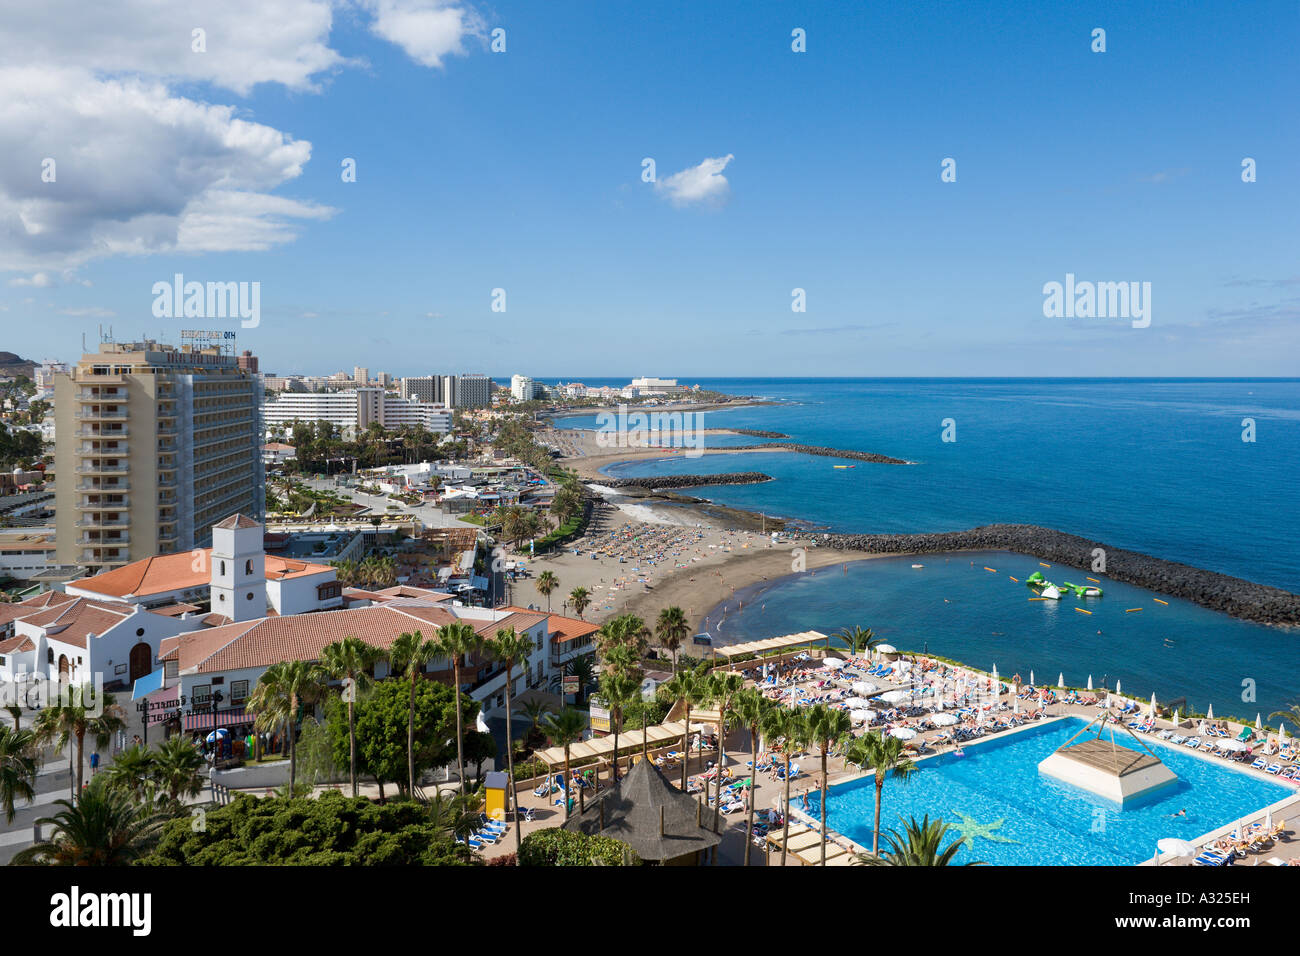 View looking south from the Hotel Iberostar Bouganville Playa, Playa de las Americas, Tenerife, Canary Islands, Spain Stock Photo